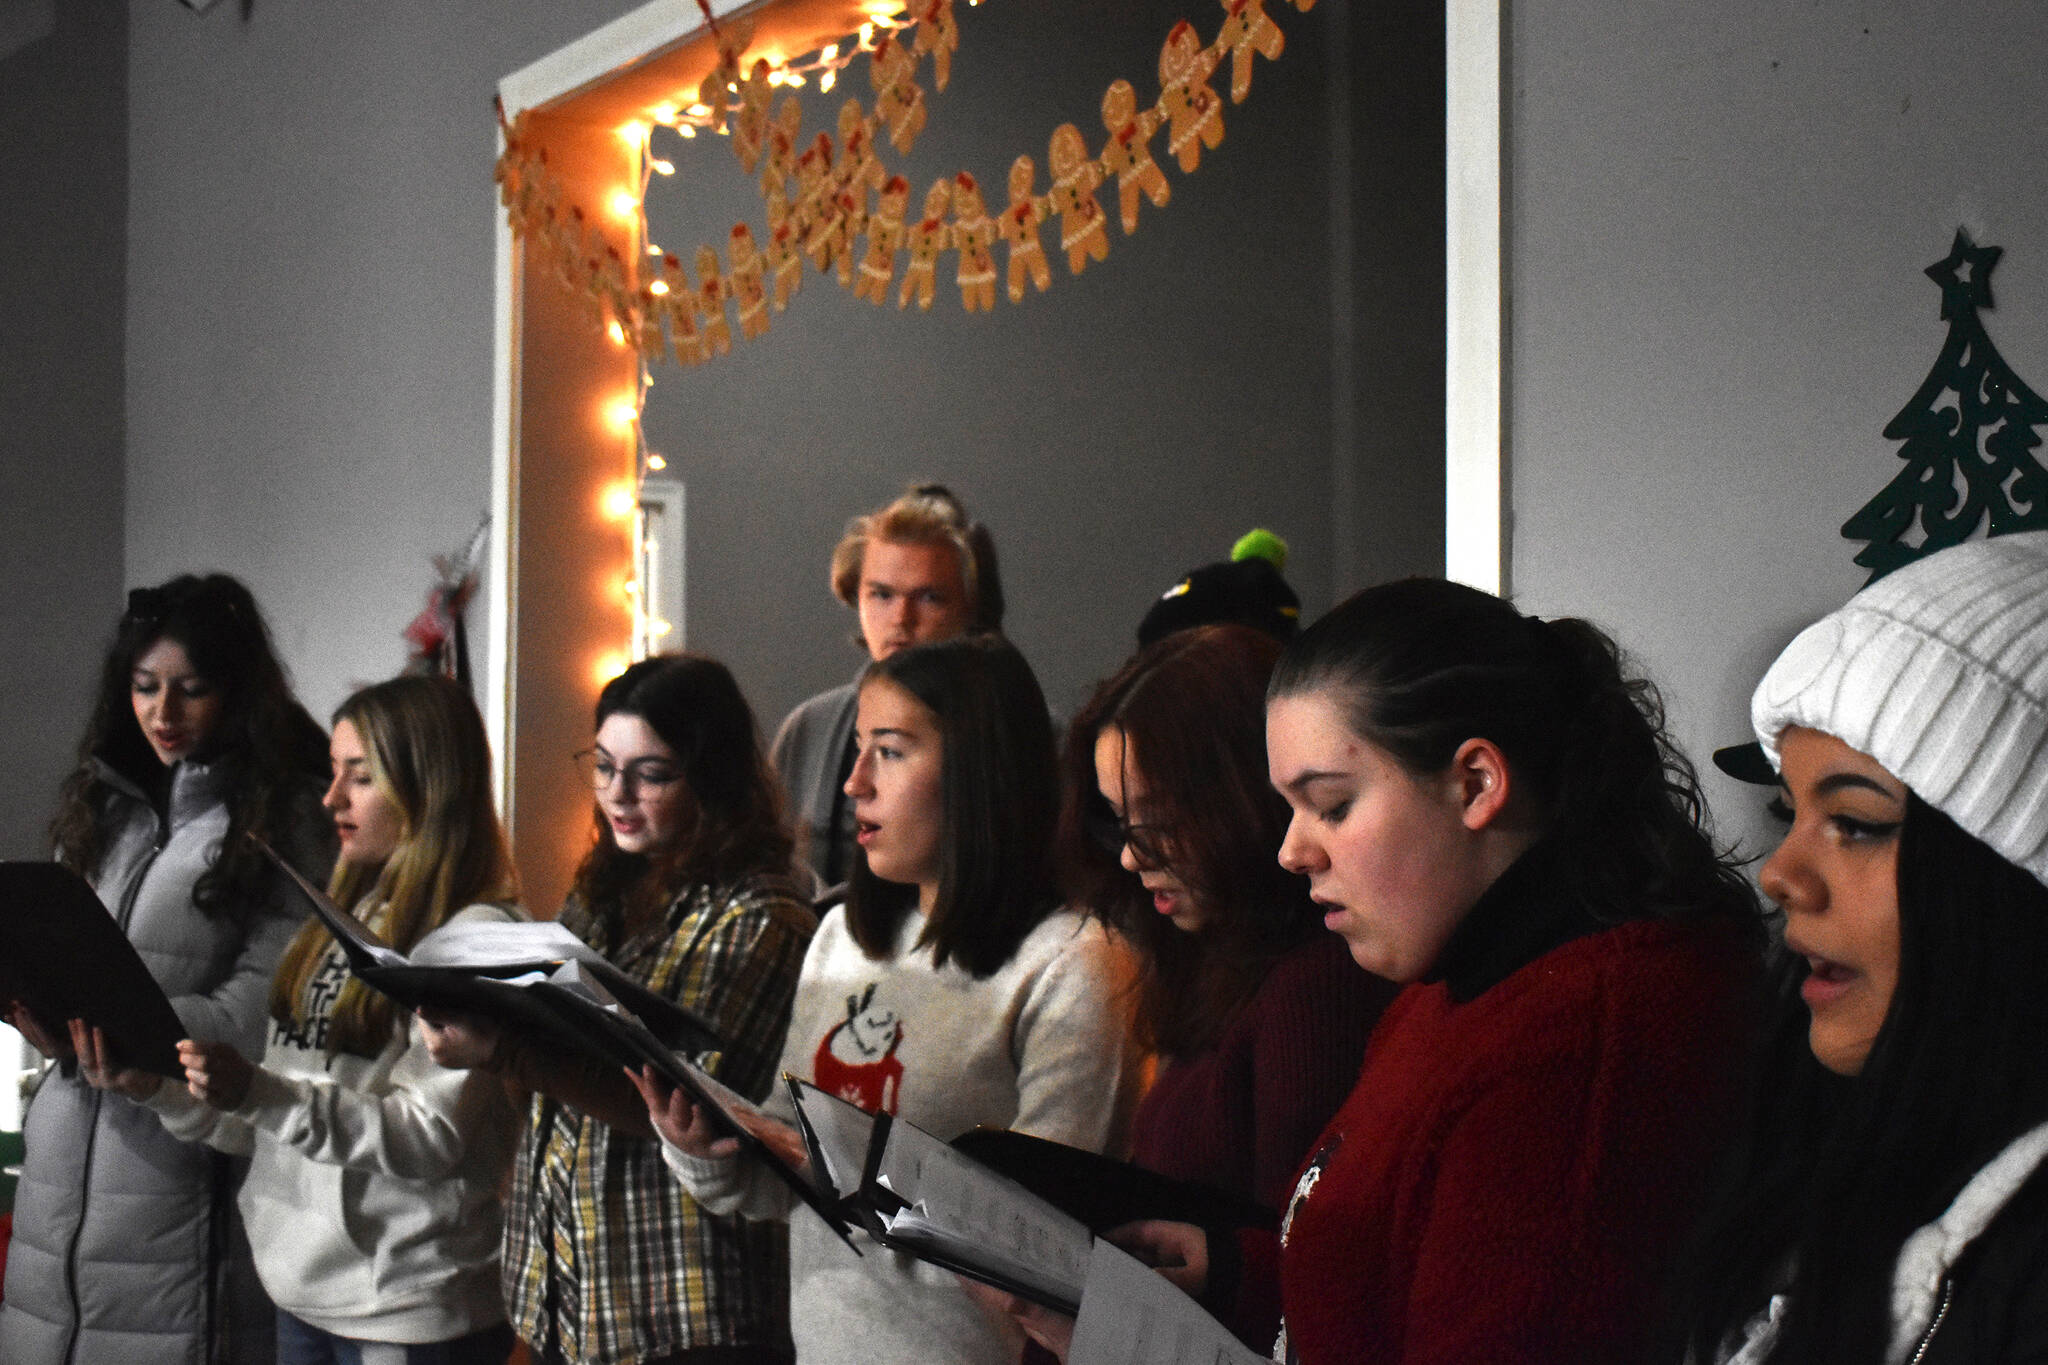 Clayton Franke / The Daily World
The Goldenaires, a local high school a cappella group, provide a Christmas serenade for those perusing Saturday’s gingerbread house display in the Go Get the Pho restaurant building.